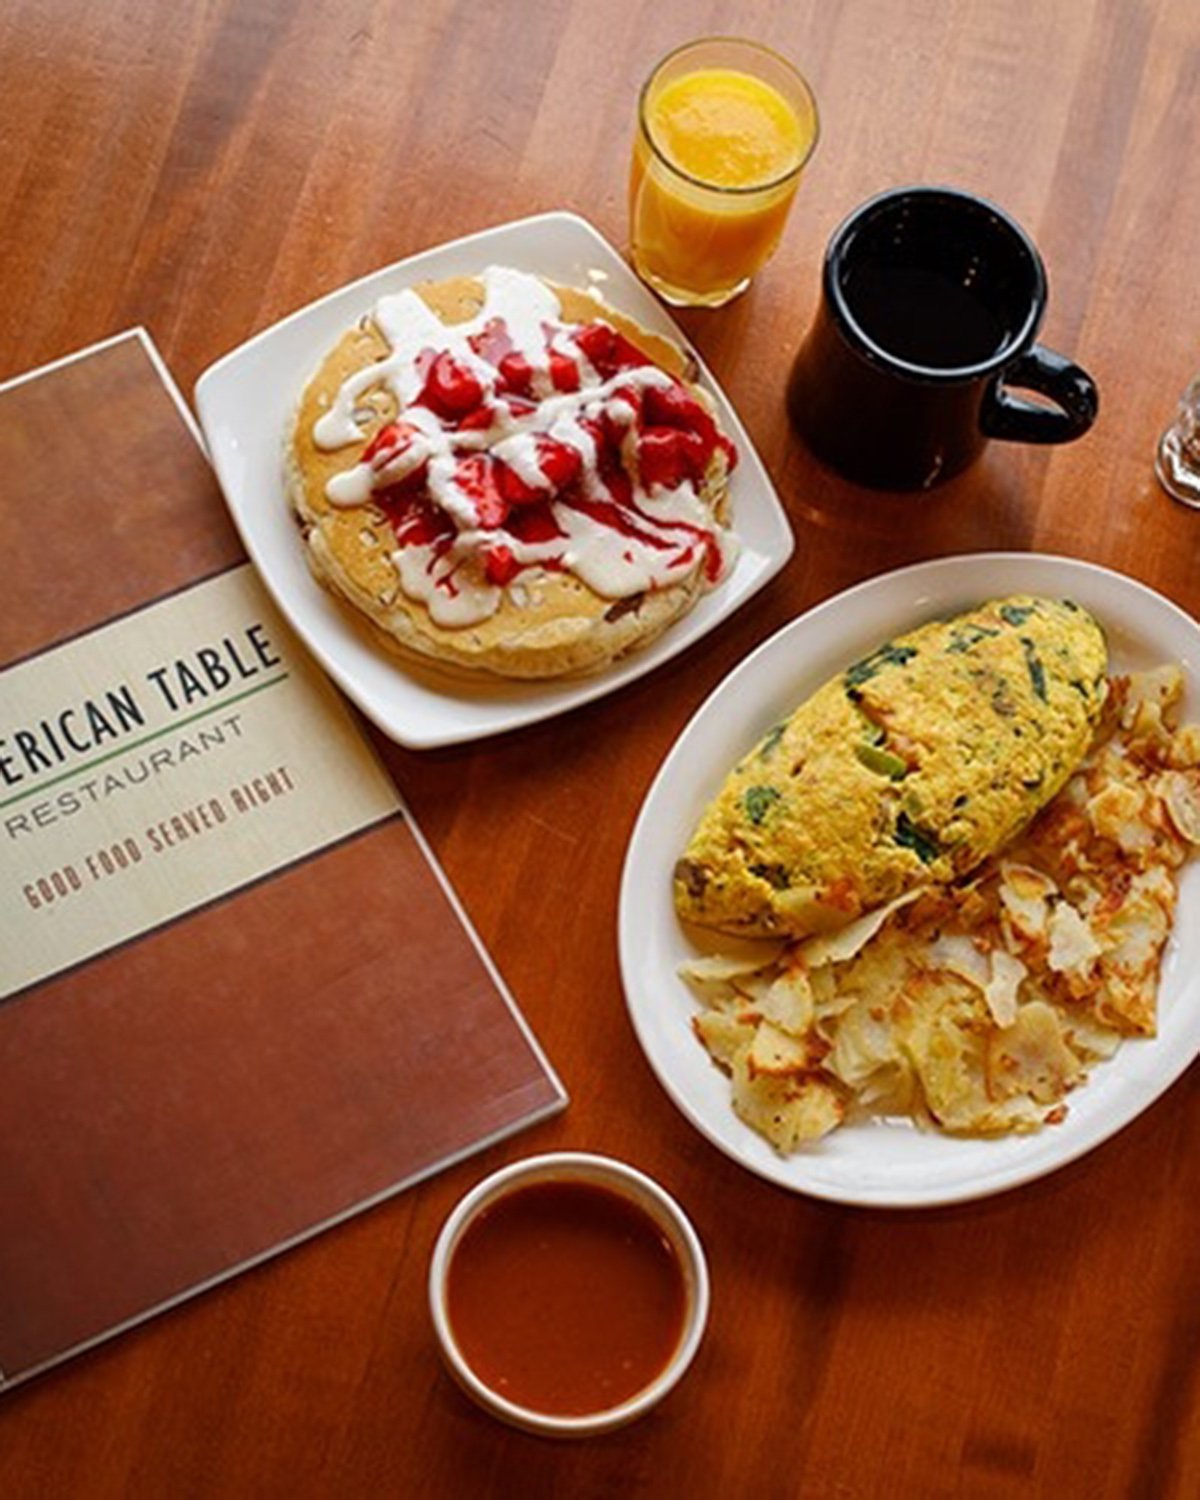 An image of an omelet, hashbrowns, stack of pancakes and beverages on a dining table next to a menu at American Table Diner in Princeton, IN